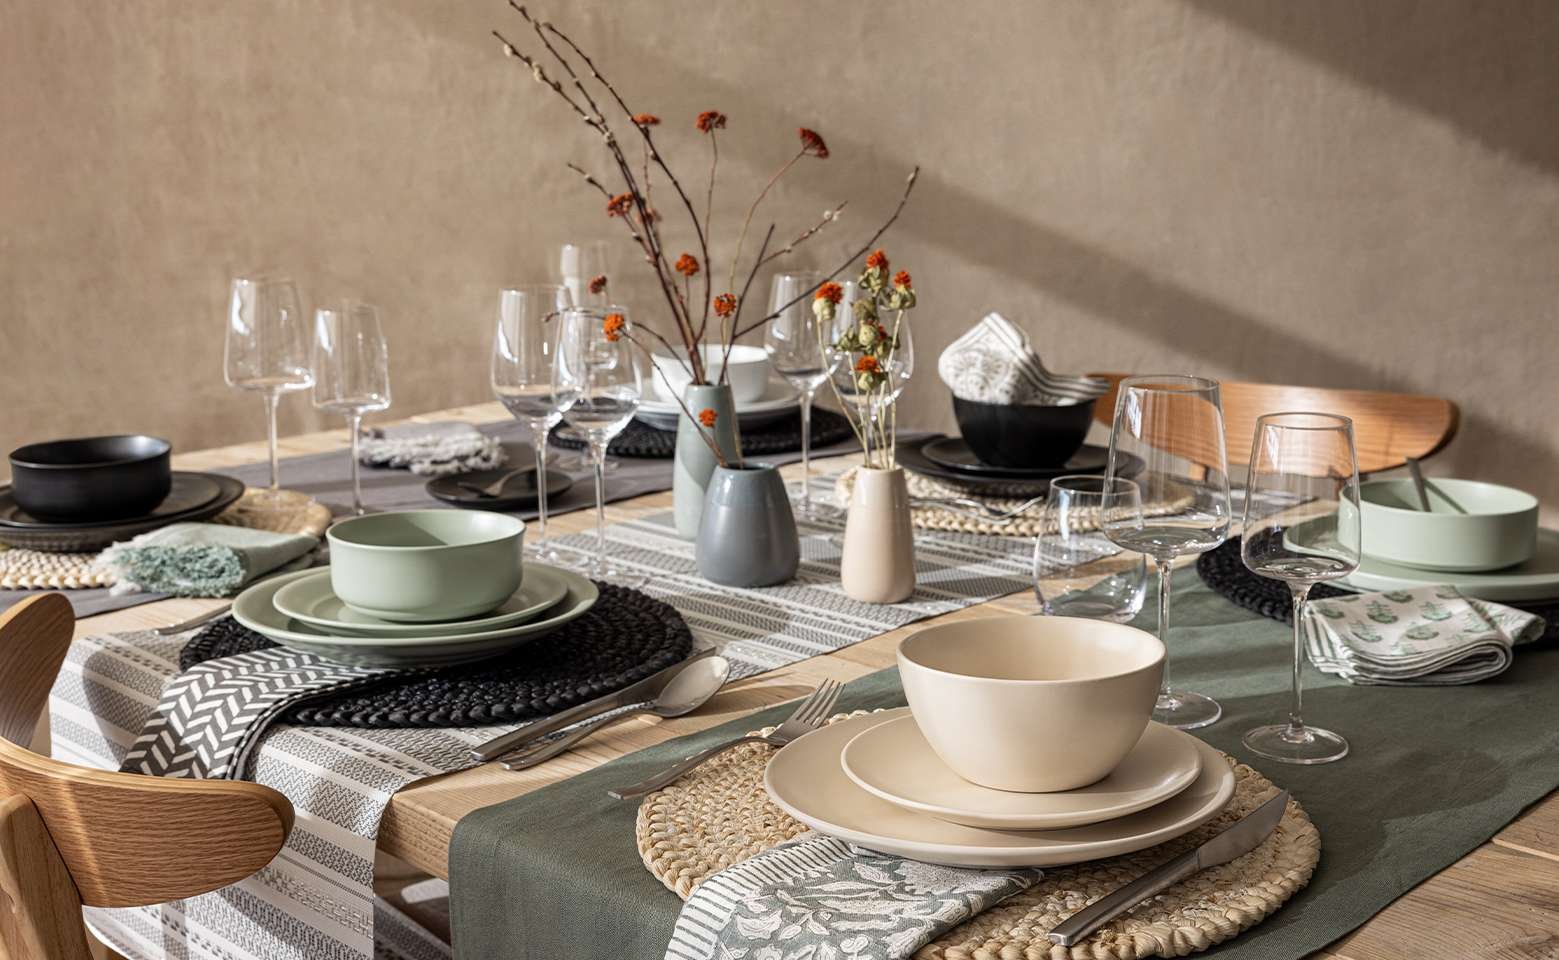 Pros Always Use These Foolproof Tips to Create Stunning Tablescapes